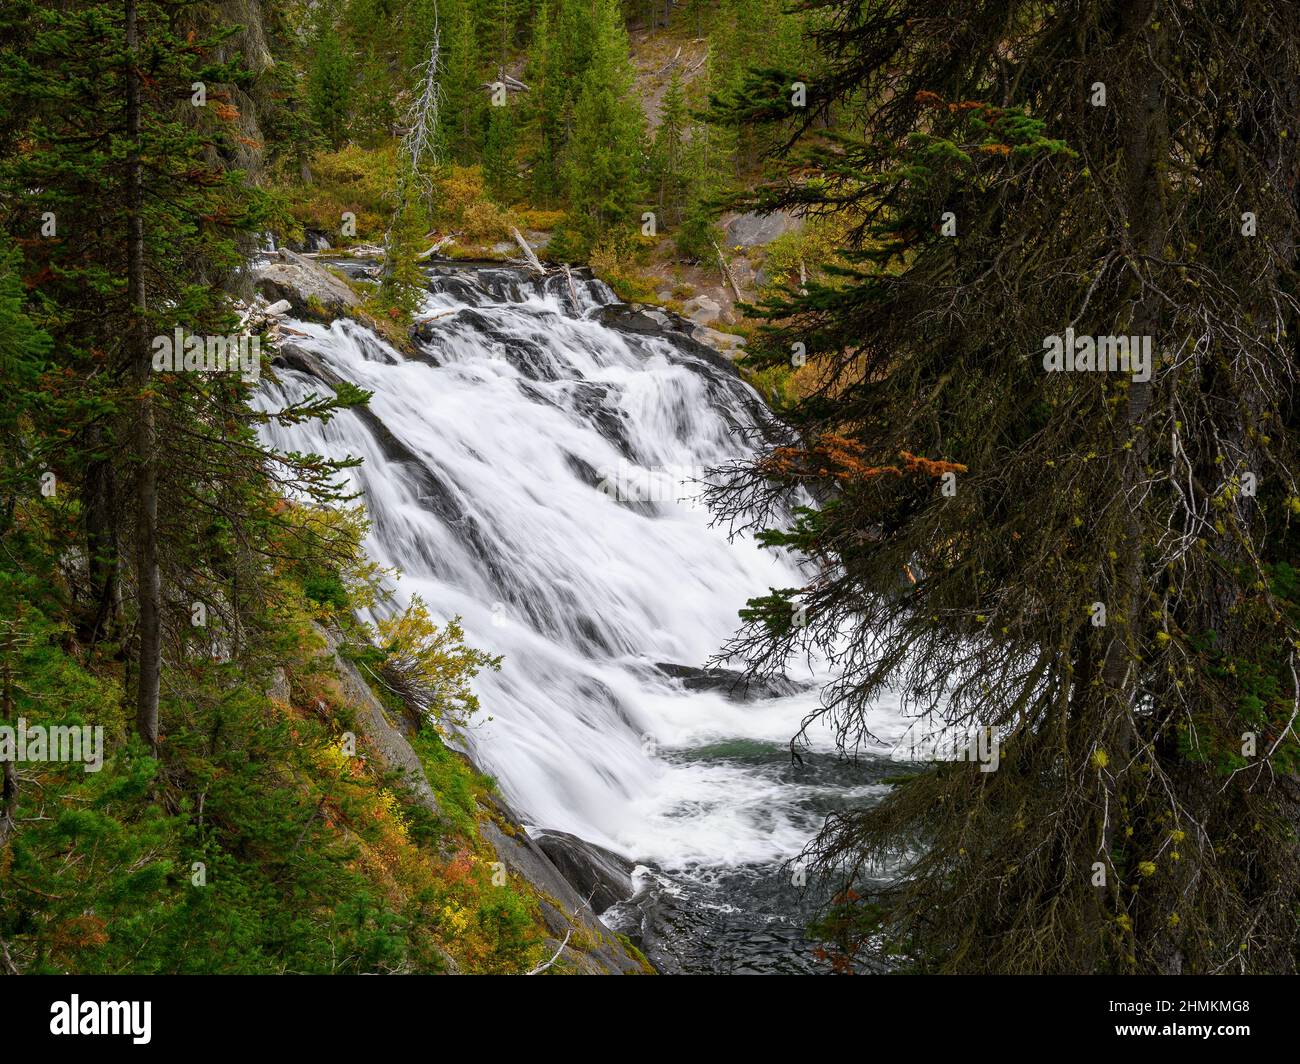 Lewis Falls, parc national de Yellowstone, Wyoming. Banque D'Images